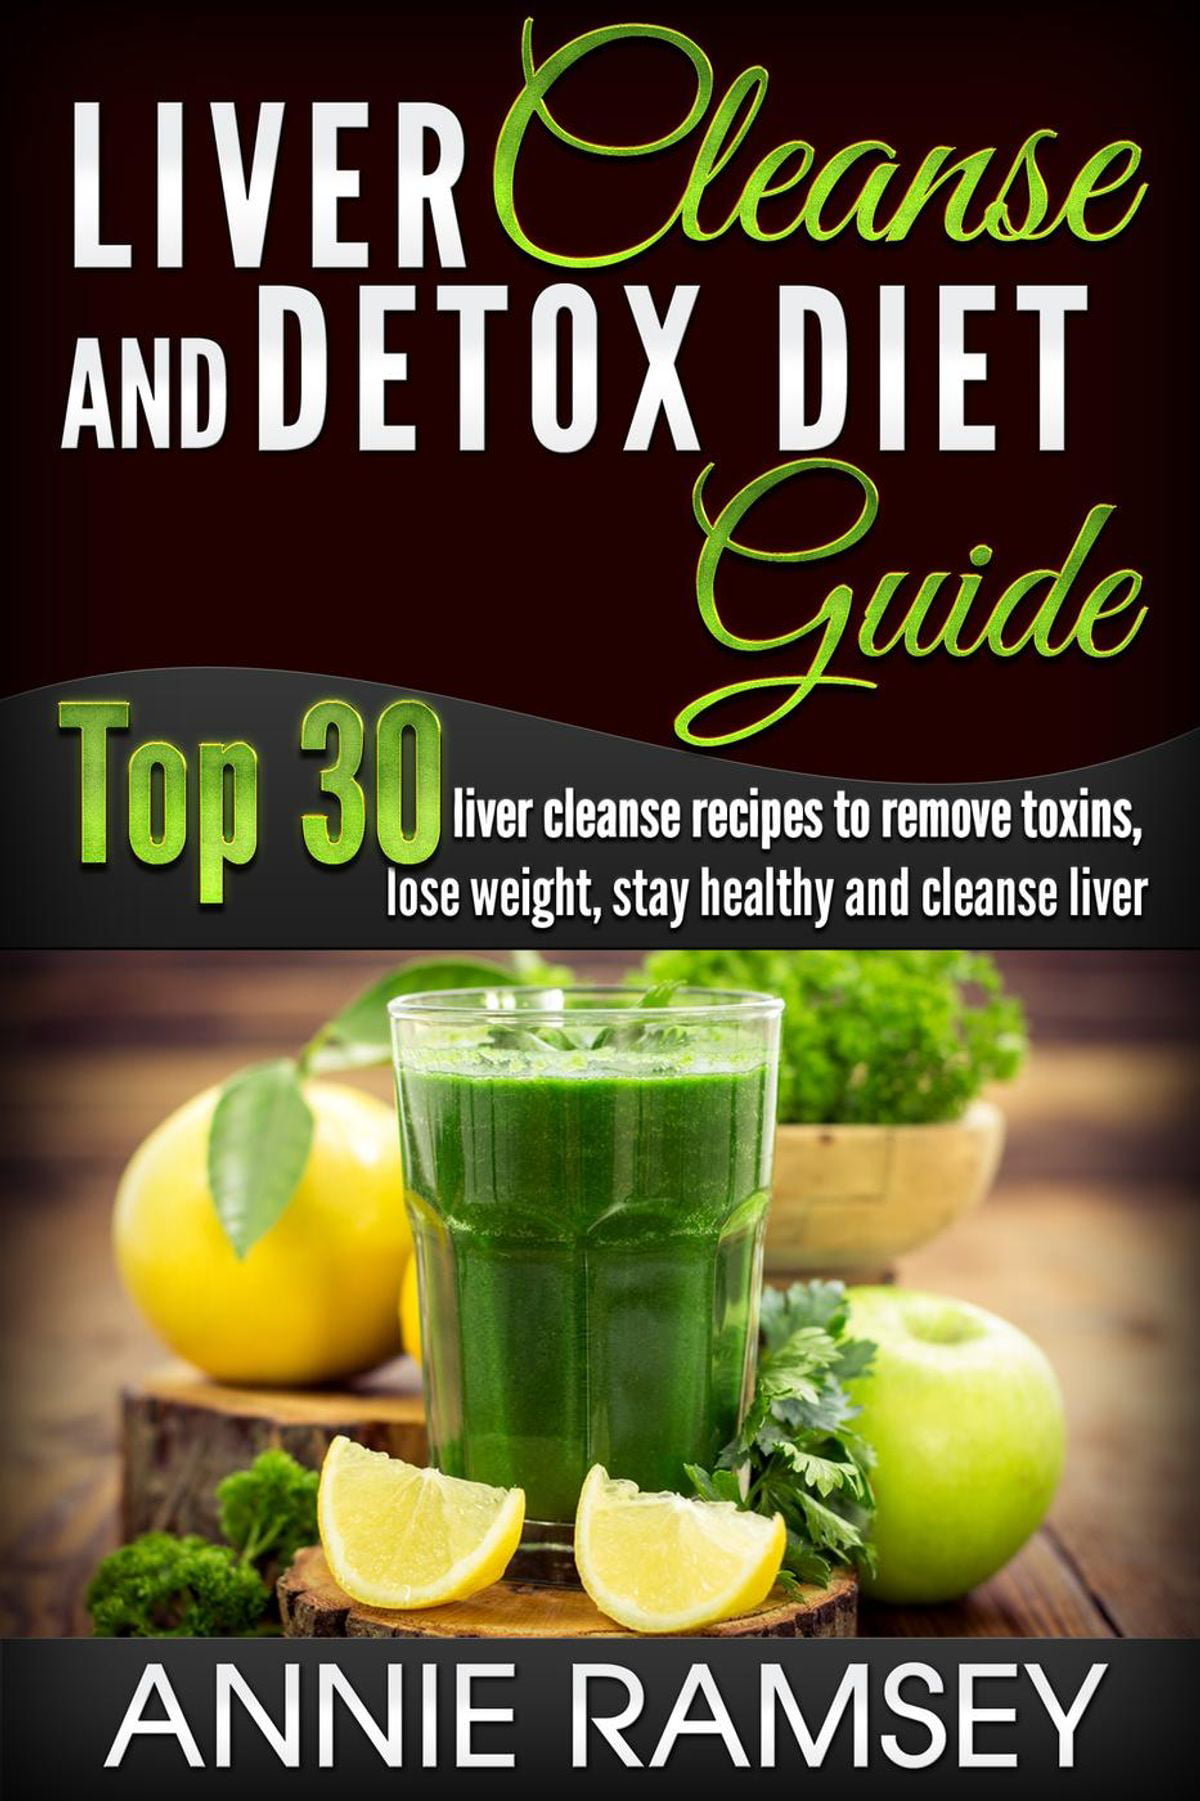 Liver Cleanse and Detox Diet Guide: Top 30 Liver Cleanse Recipes to